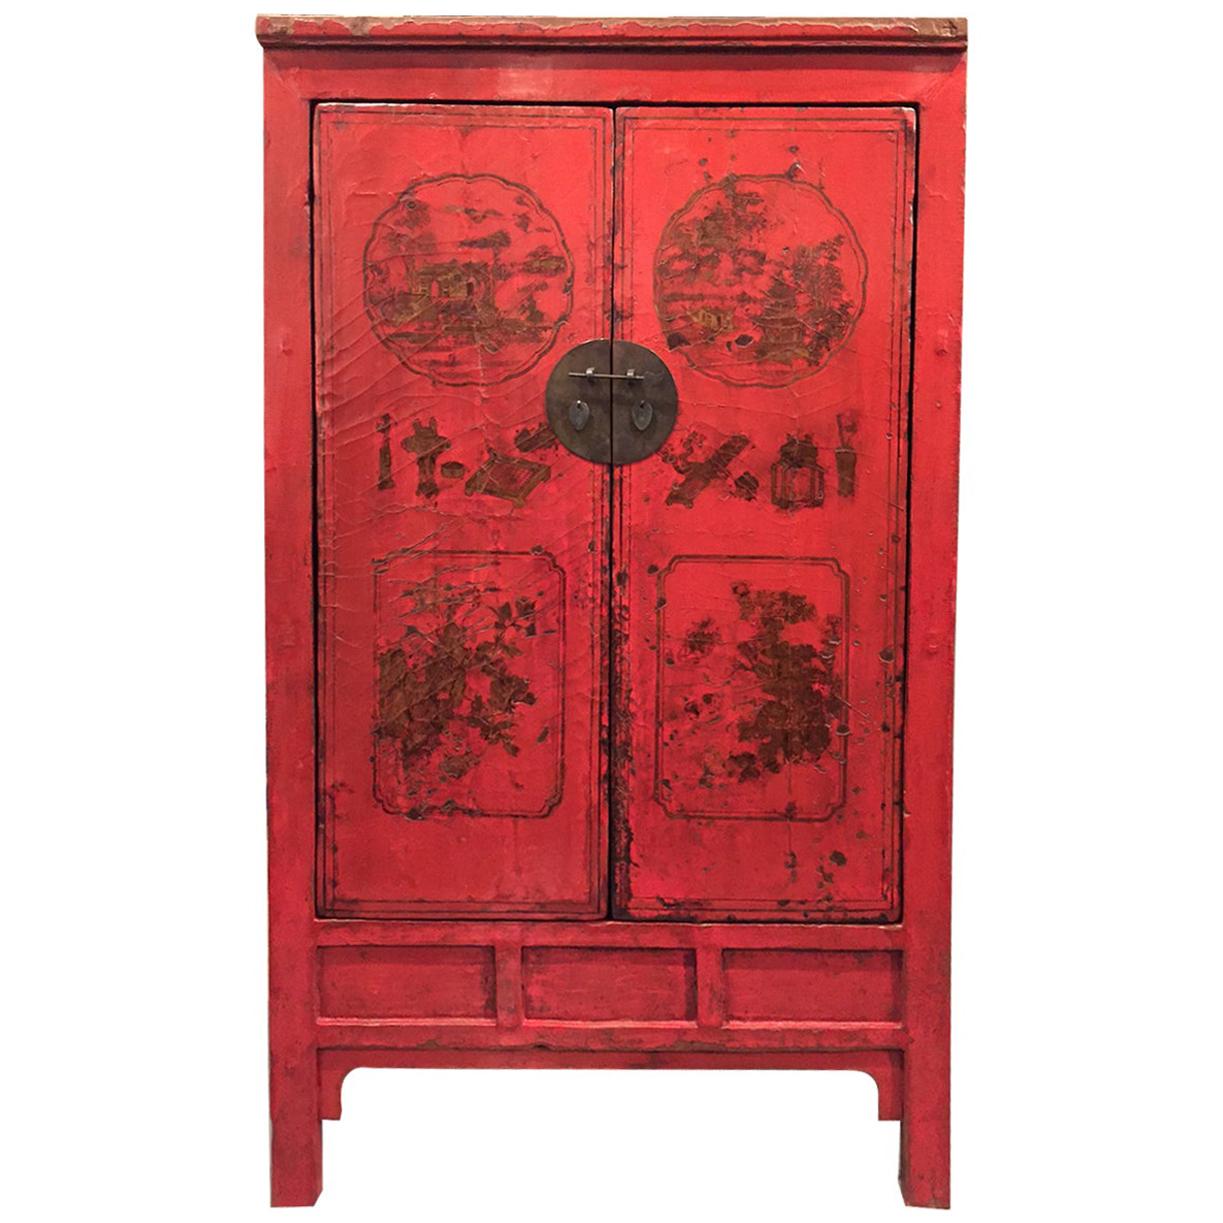 Antique Chinese  Lacquered Cabinet With Highly Detailed Painted Images